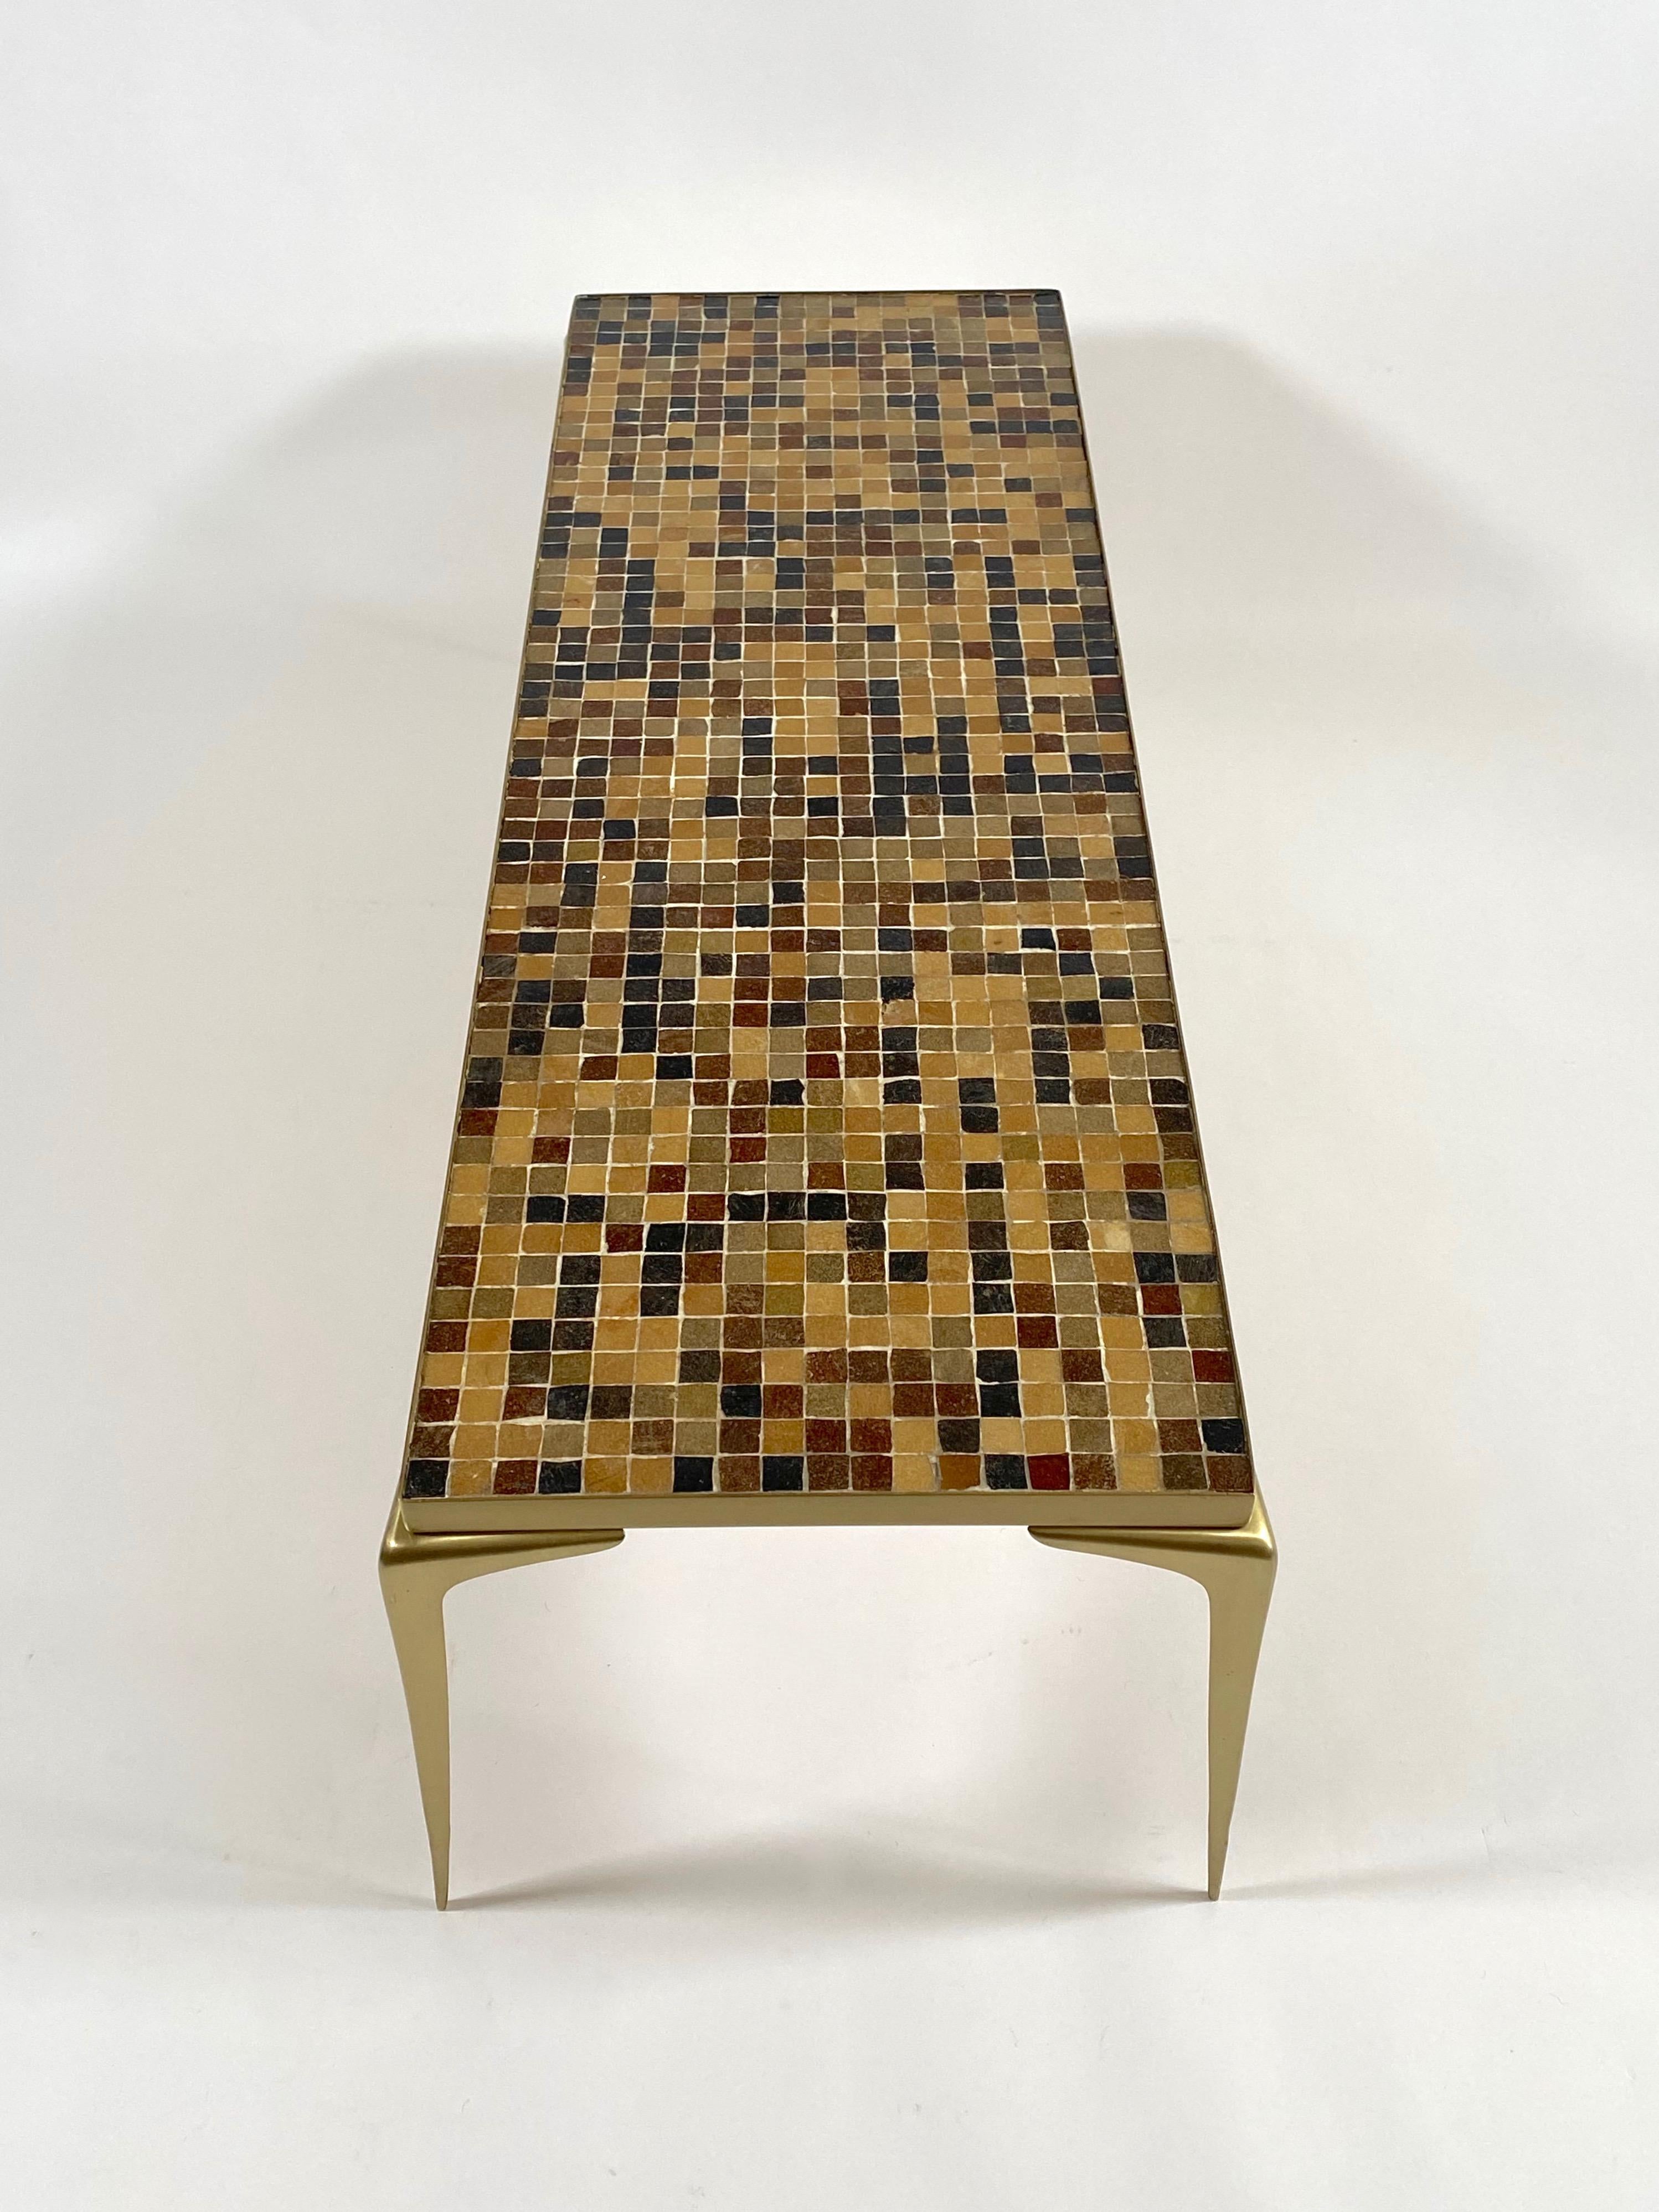 Mid-20th Century 1960s Japanese Coffee Table in Brass with Square Glass Tiles